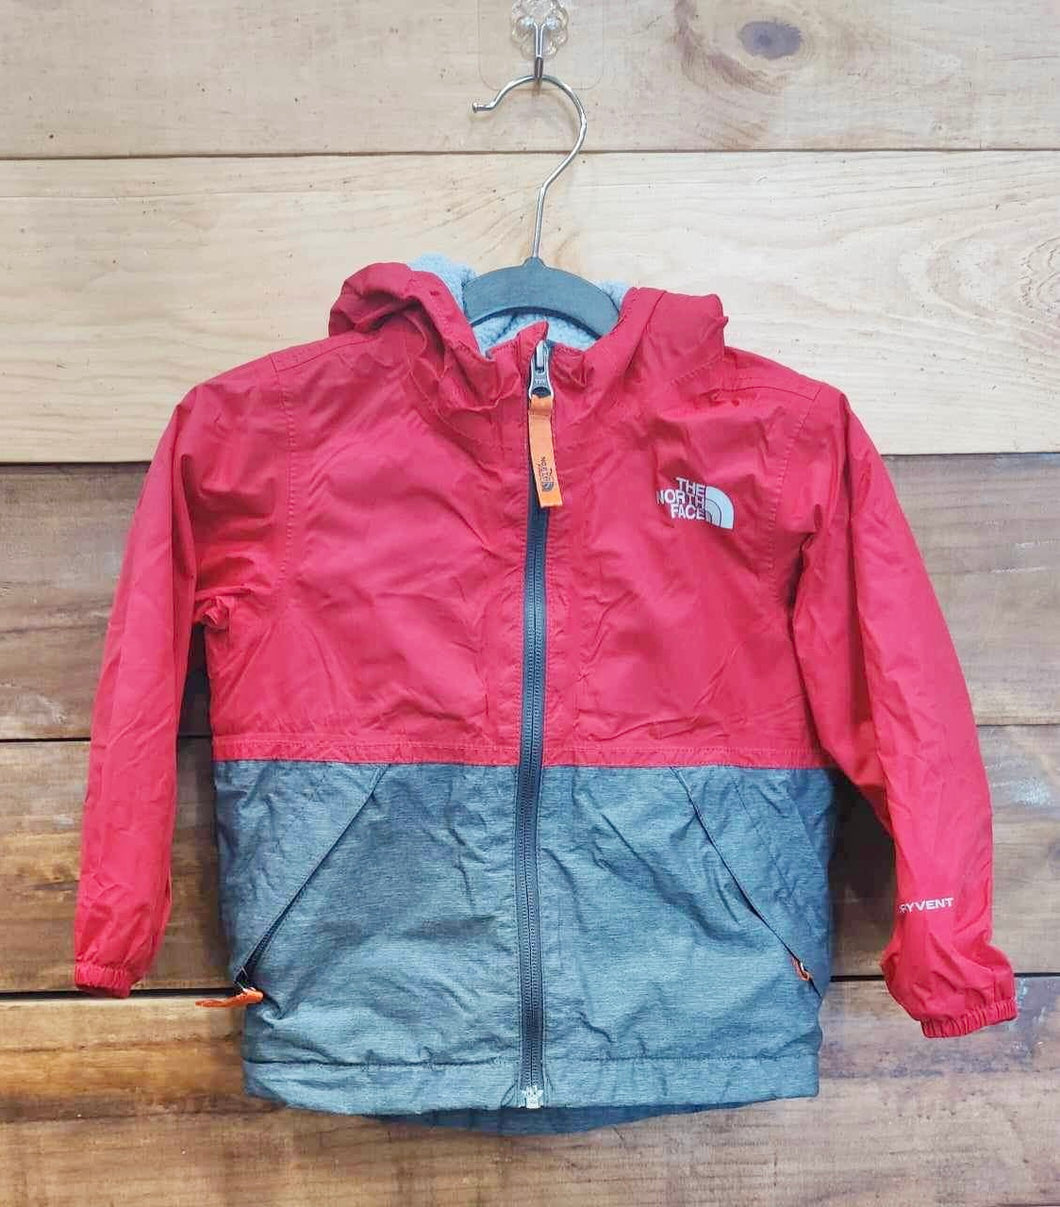 The North Face Red Jacket Jacket Size 2T